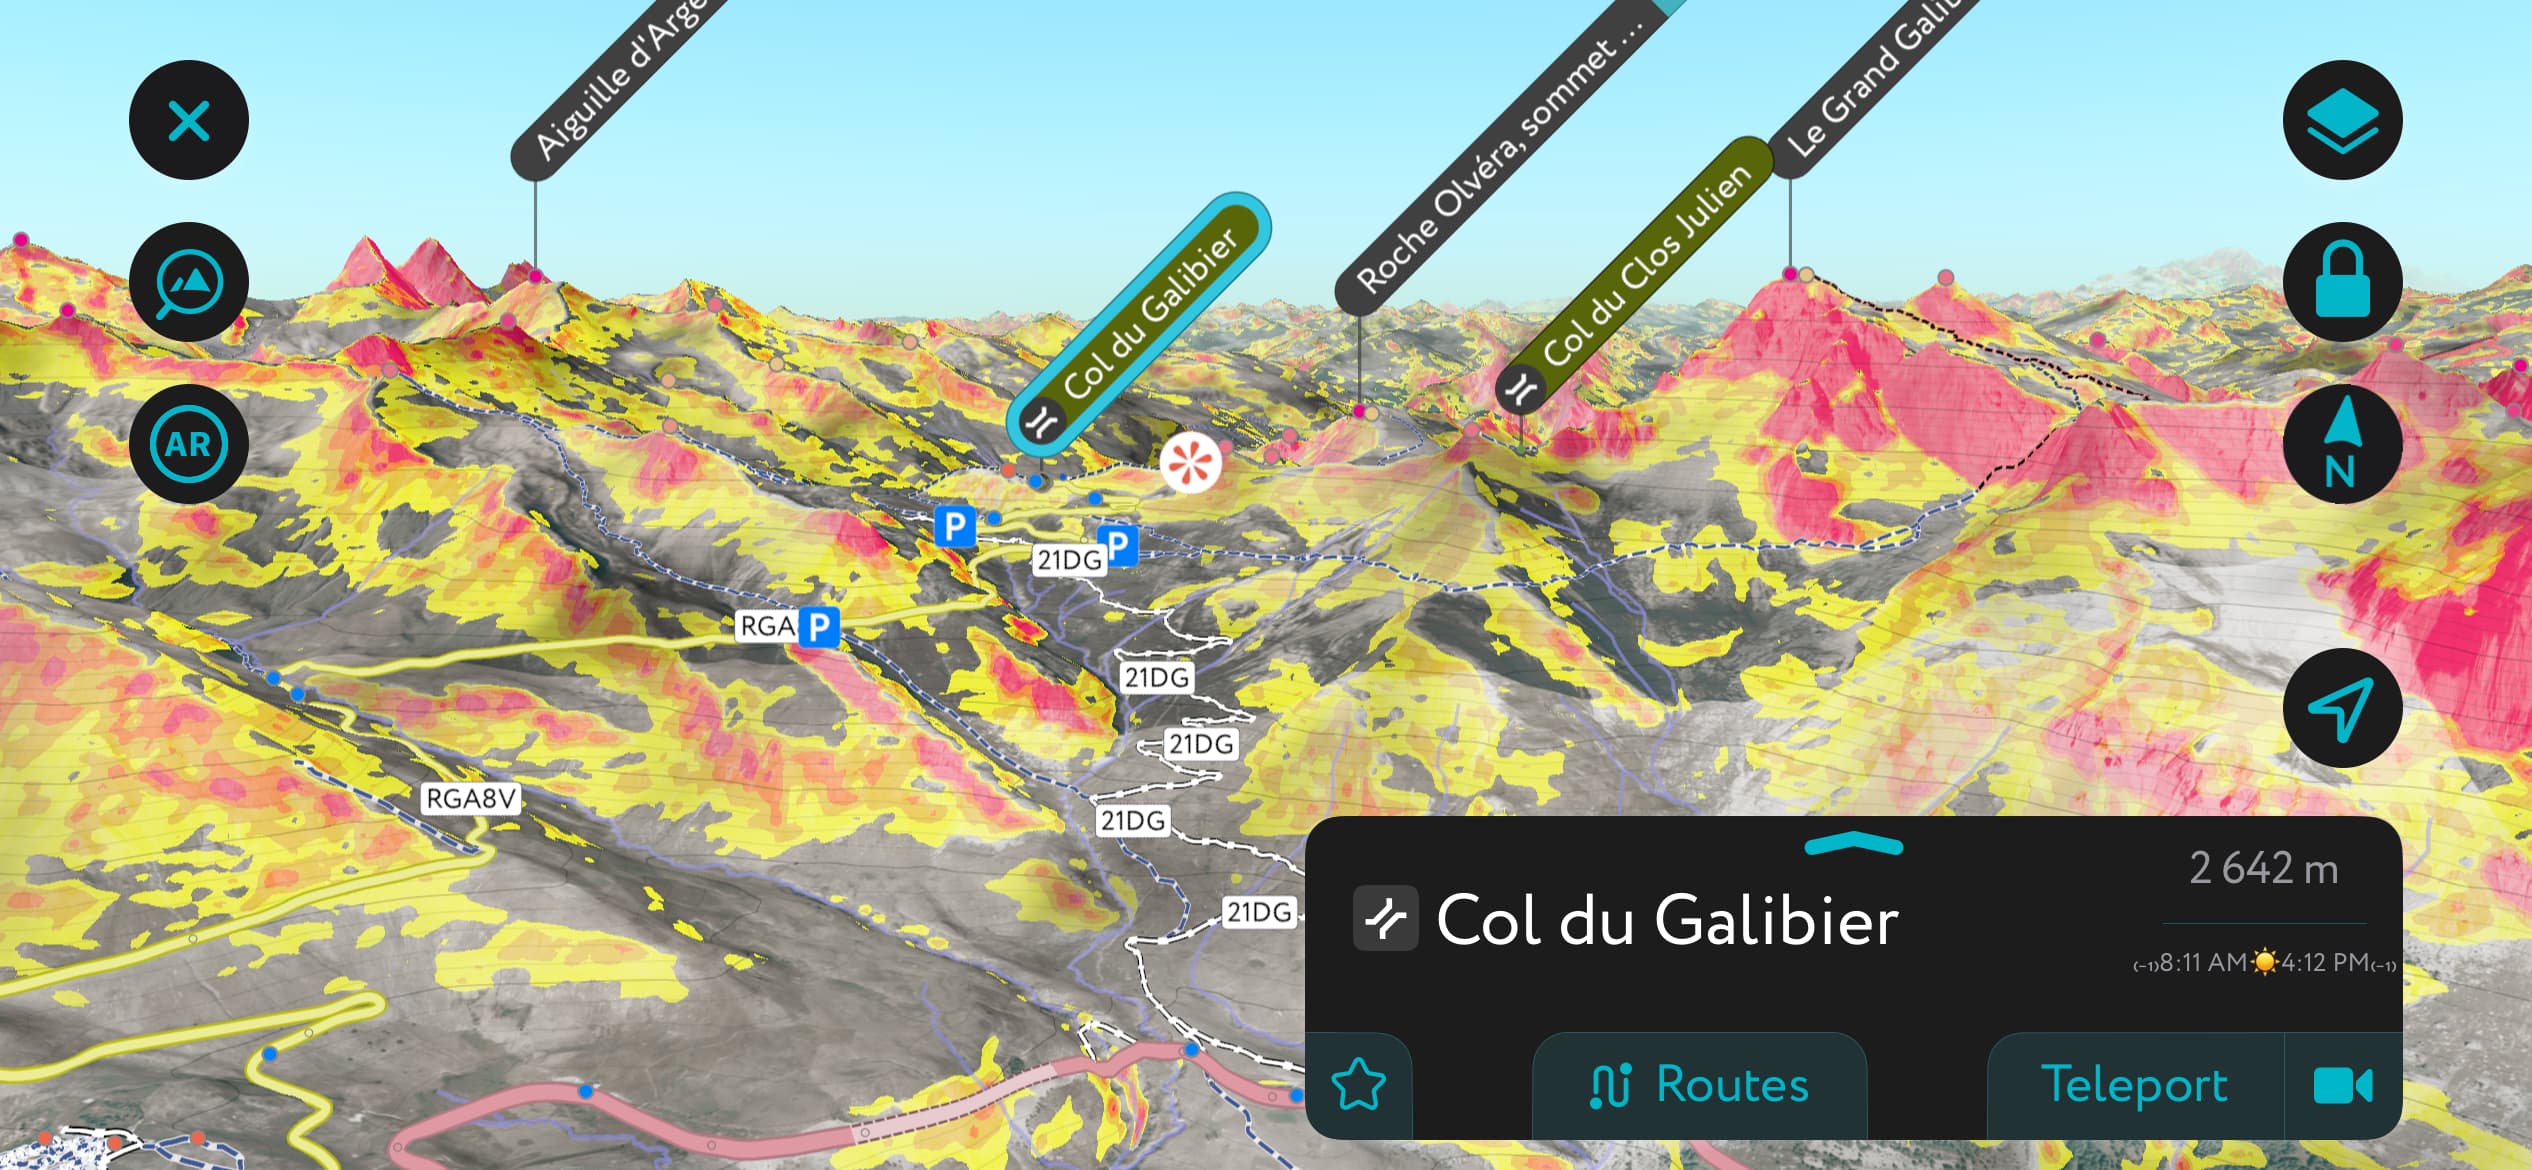 The Secrets to Finding the Best Snow Off-Piste. The Col du Galibier, just on the opposite side of the pass from the above shot. There are more low-angle objectives on this side